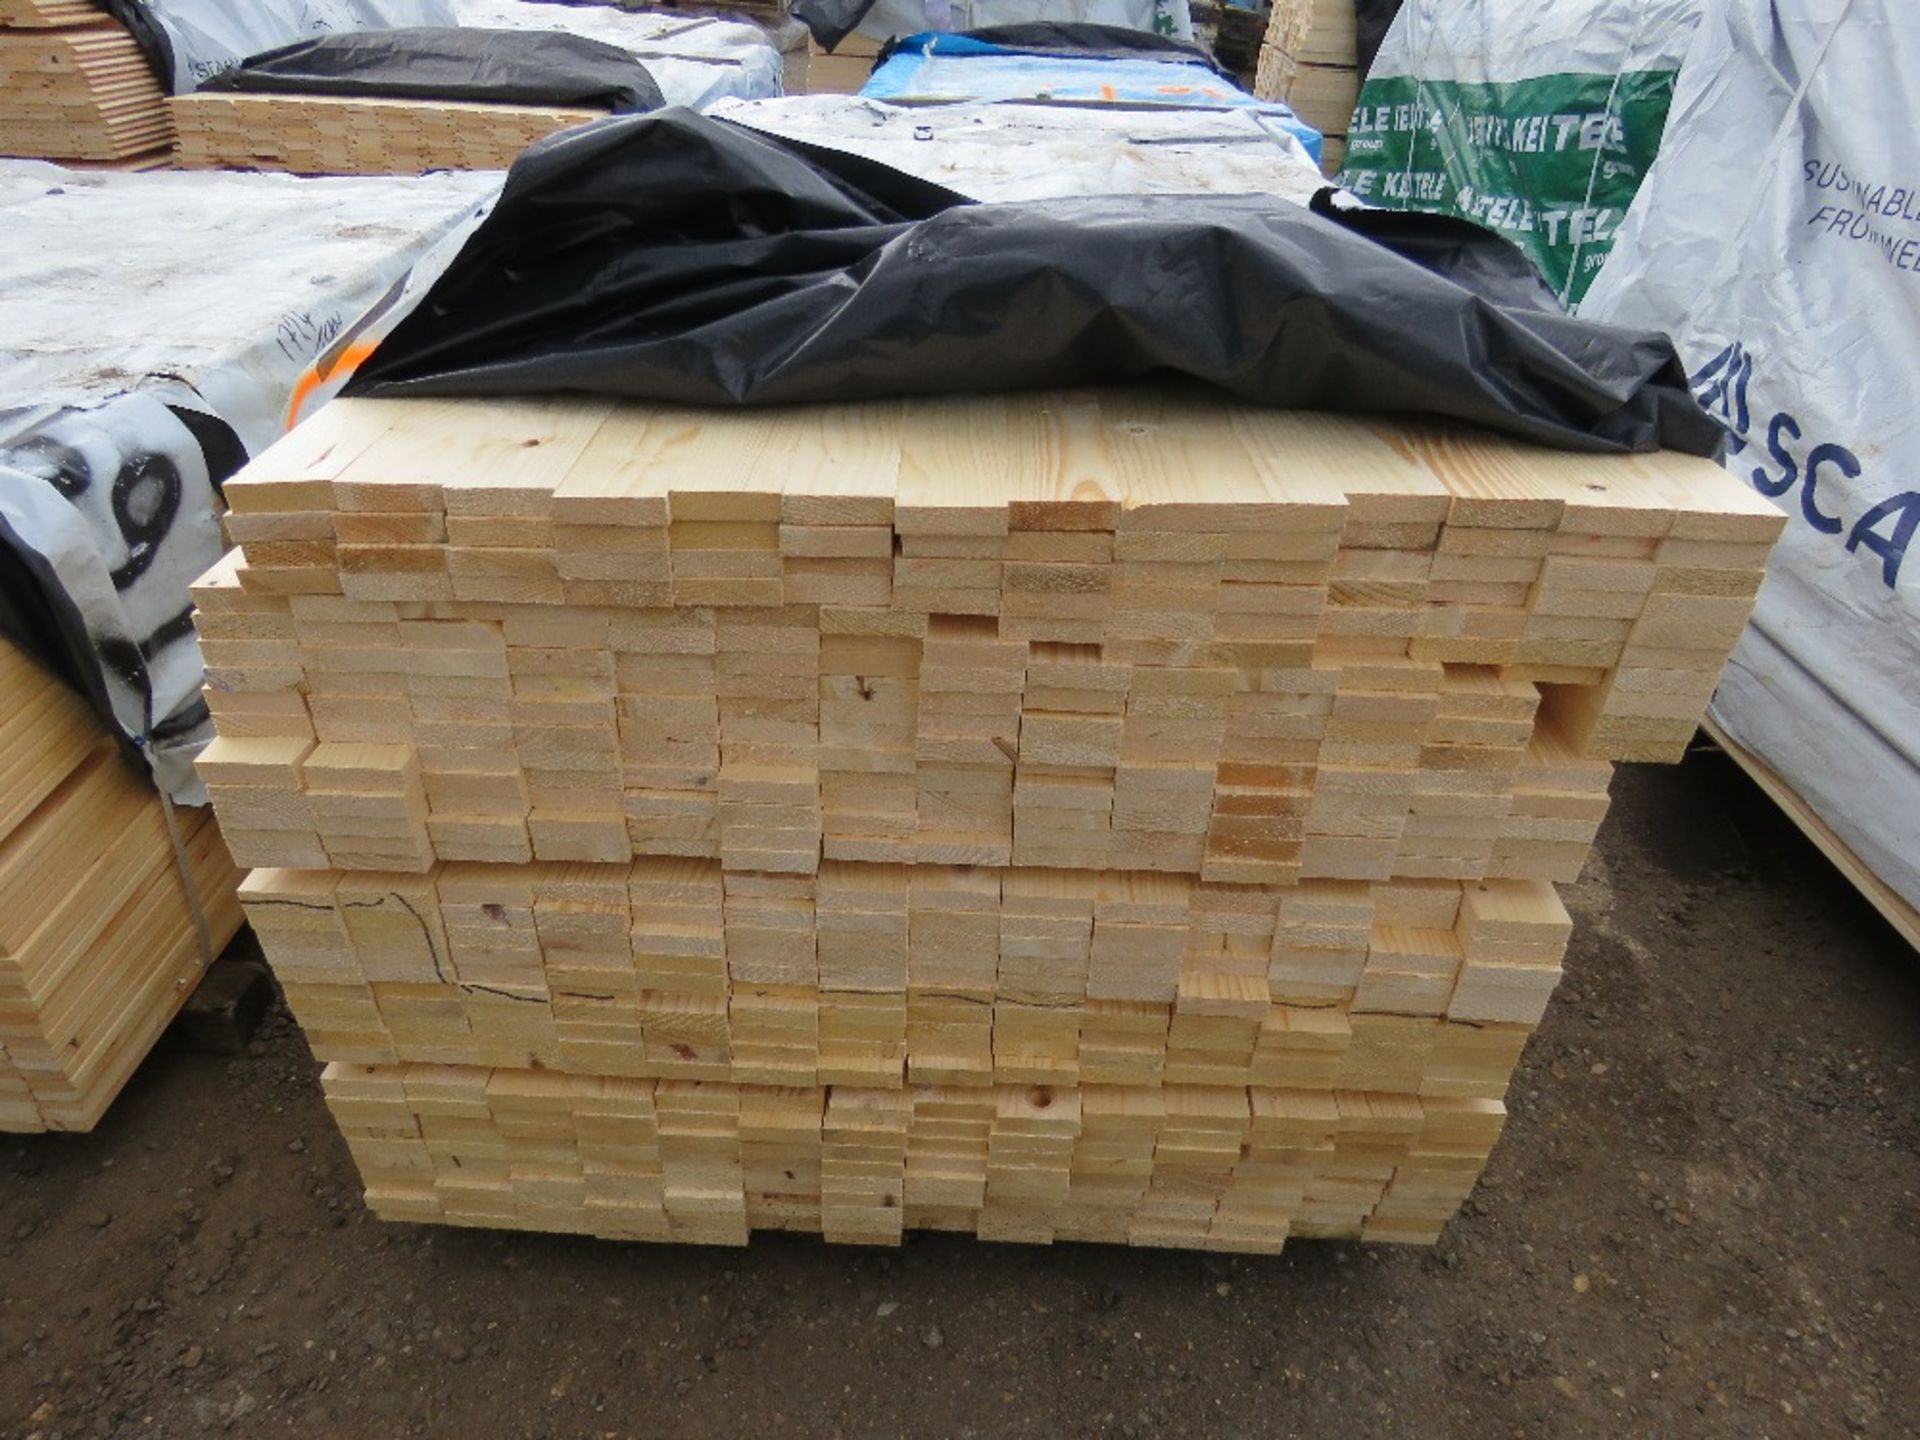 PACK OF UNTREATED TIMBER FENCE CLADDING SLATS: 1.8M LENGTH X 70MM X 20MM WIDTH APPROX.